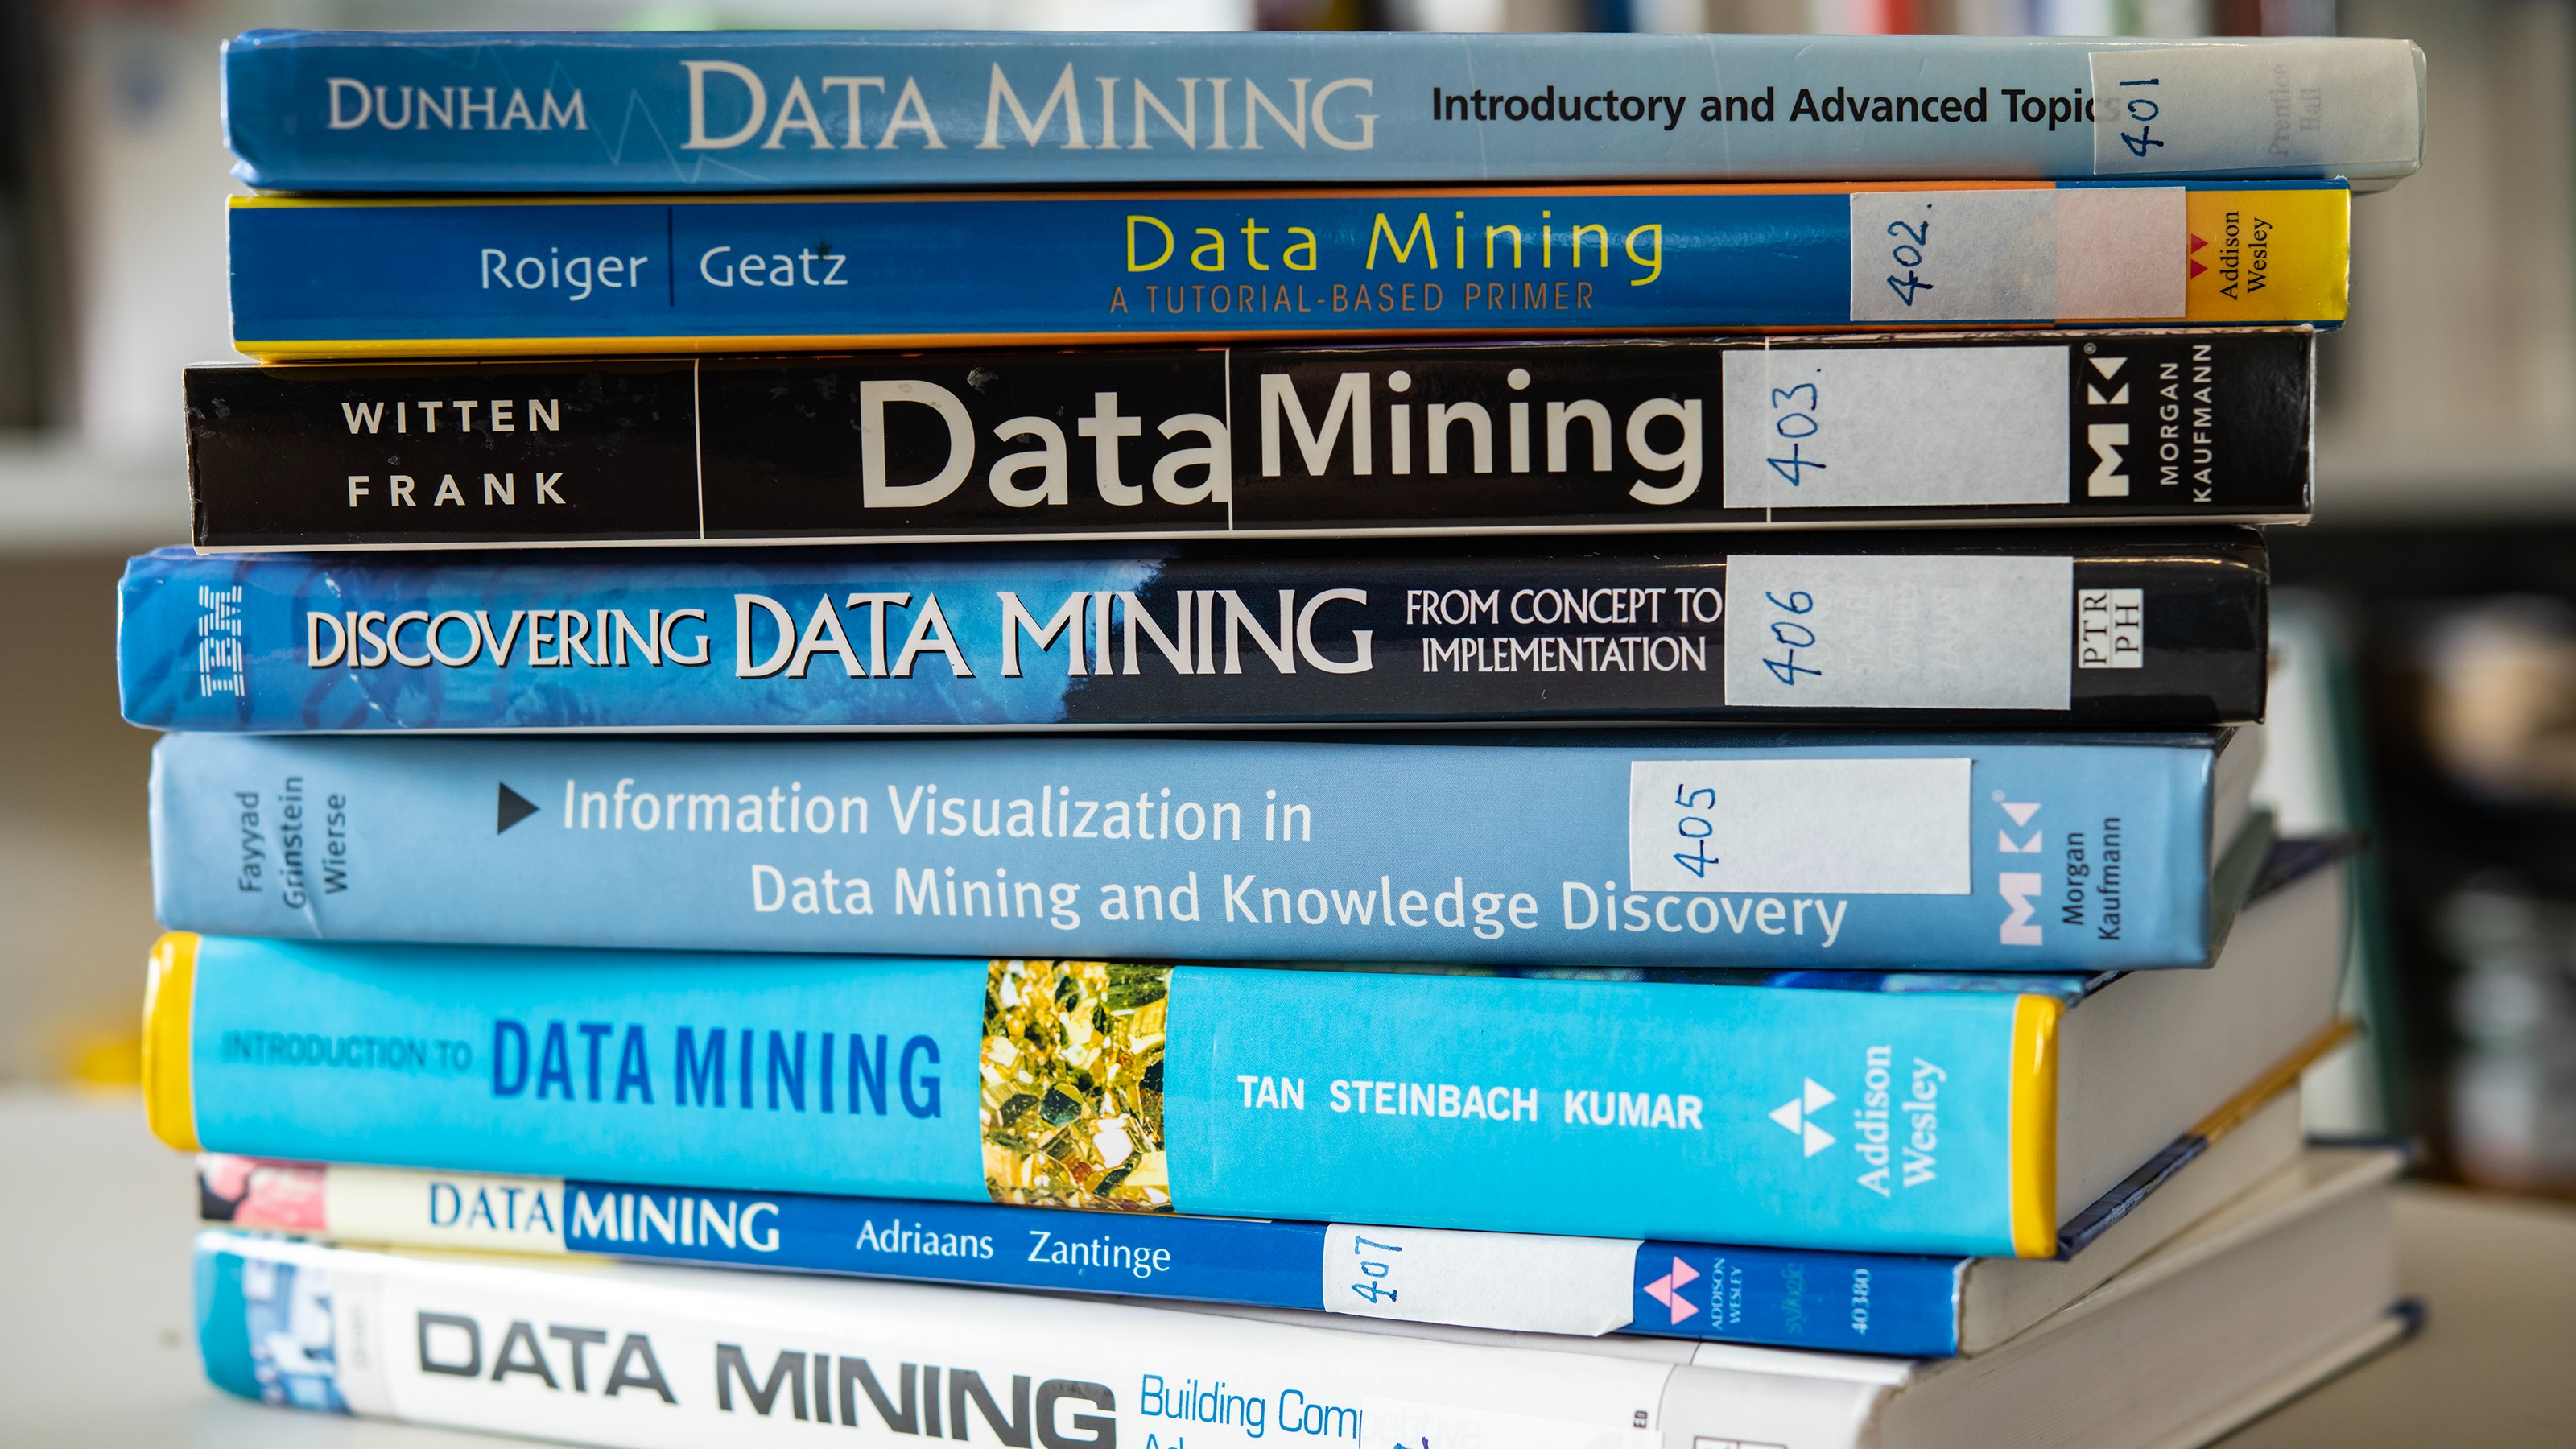 Stack of books on the topic of data mining